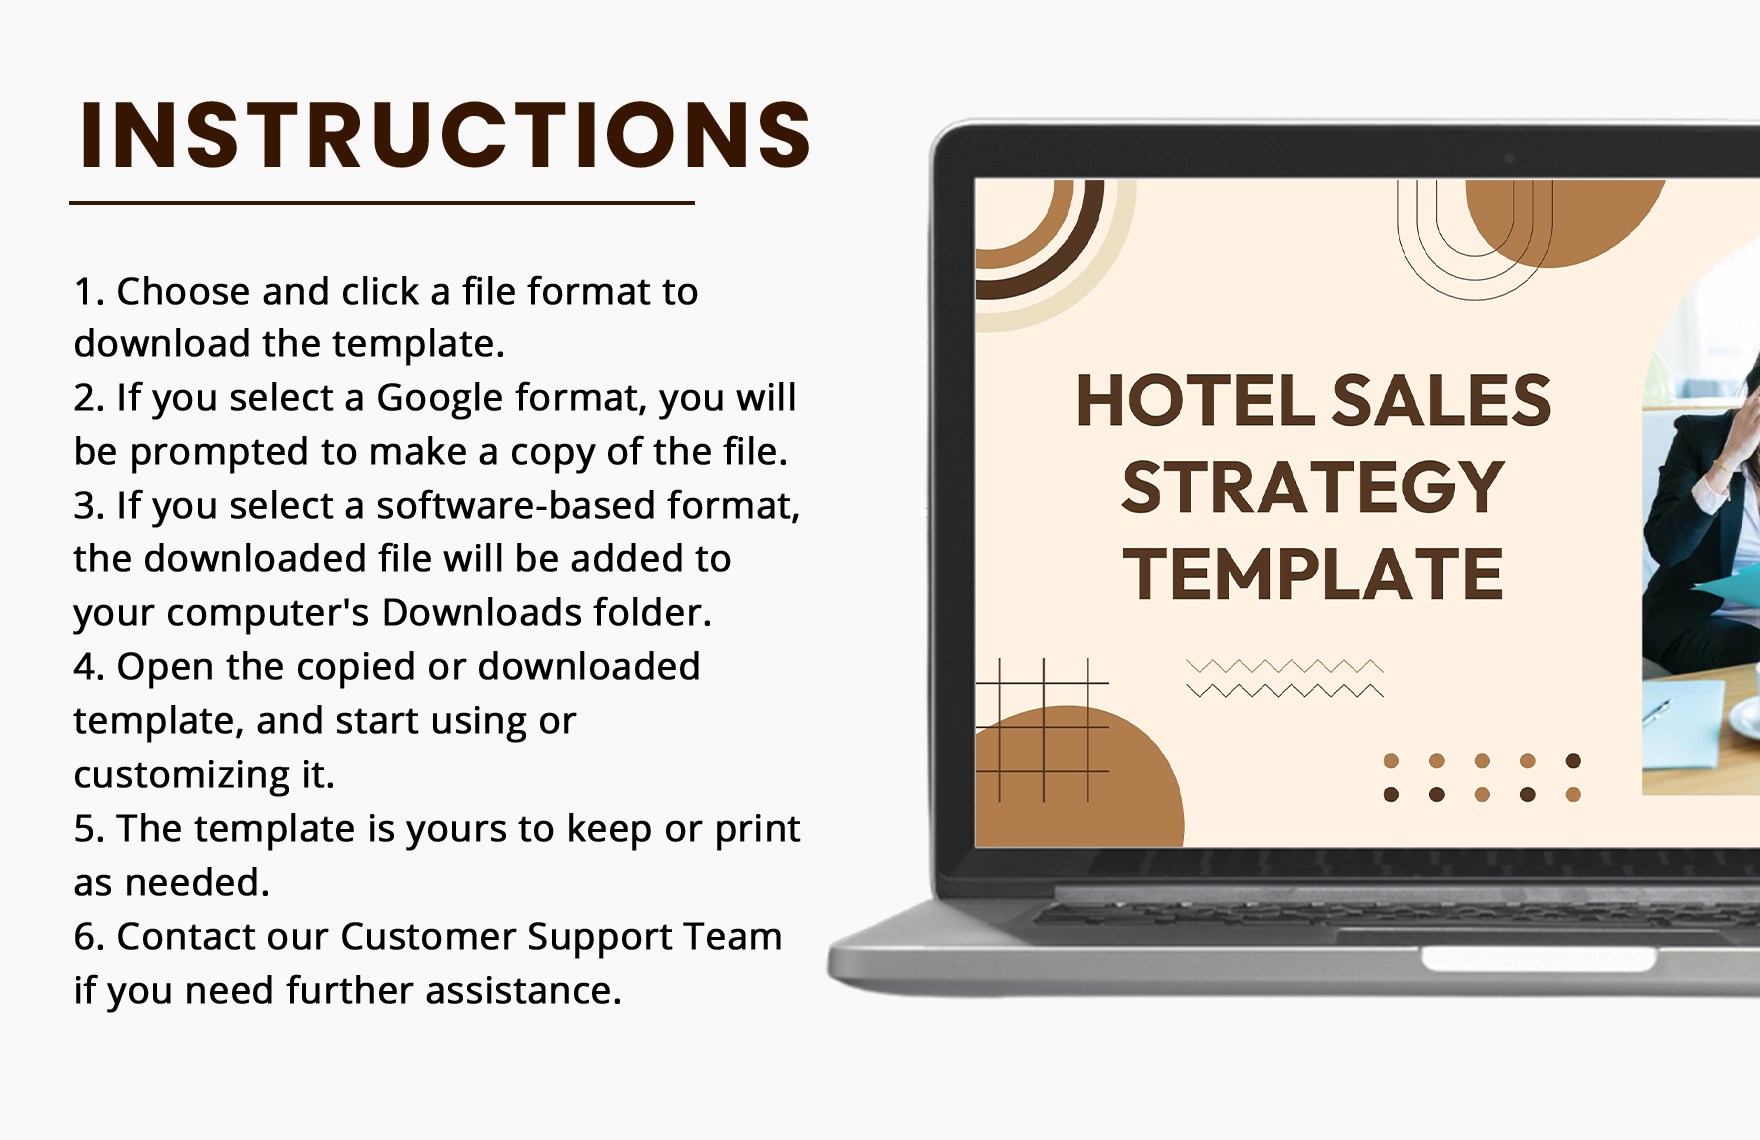 Hotel Sales Strategy Template